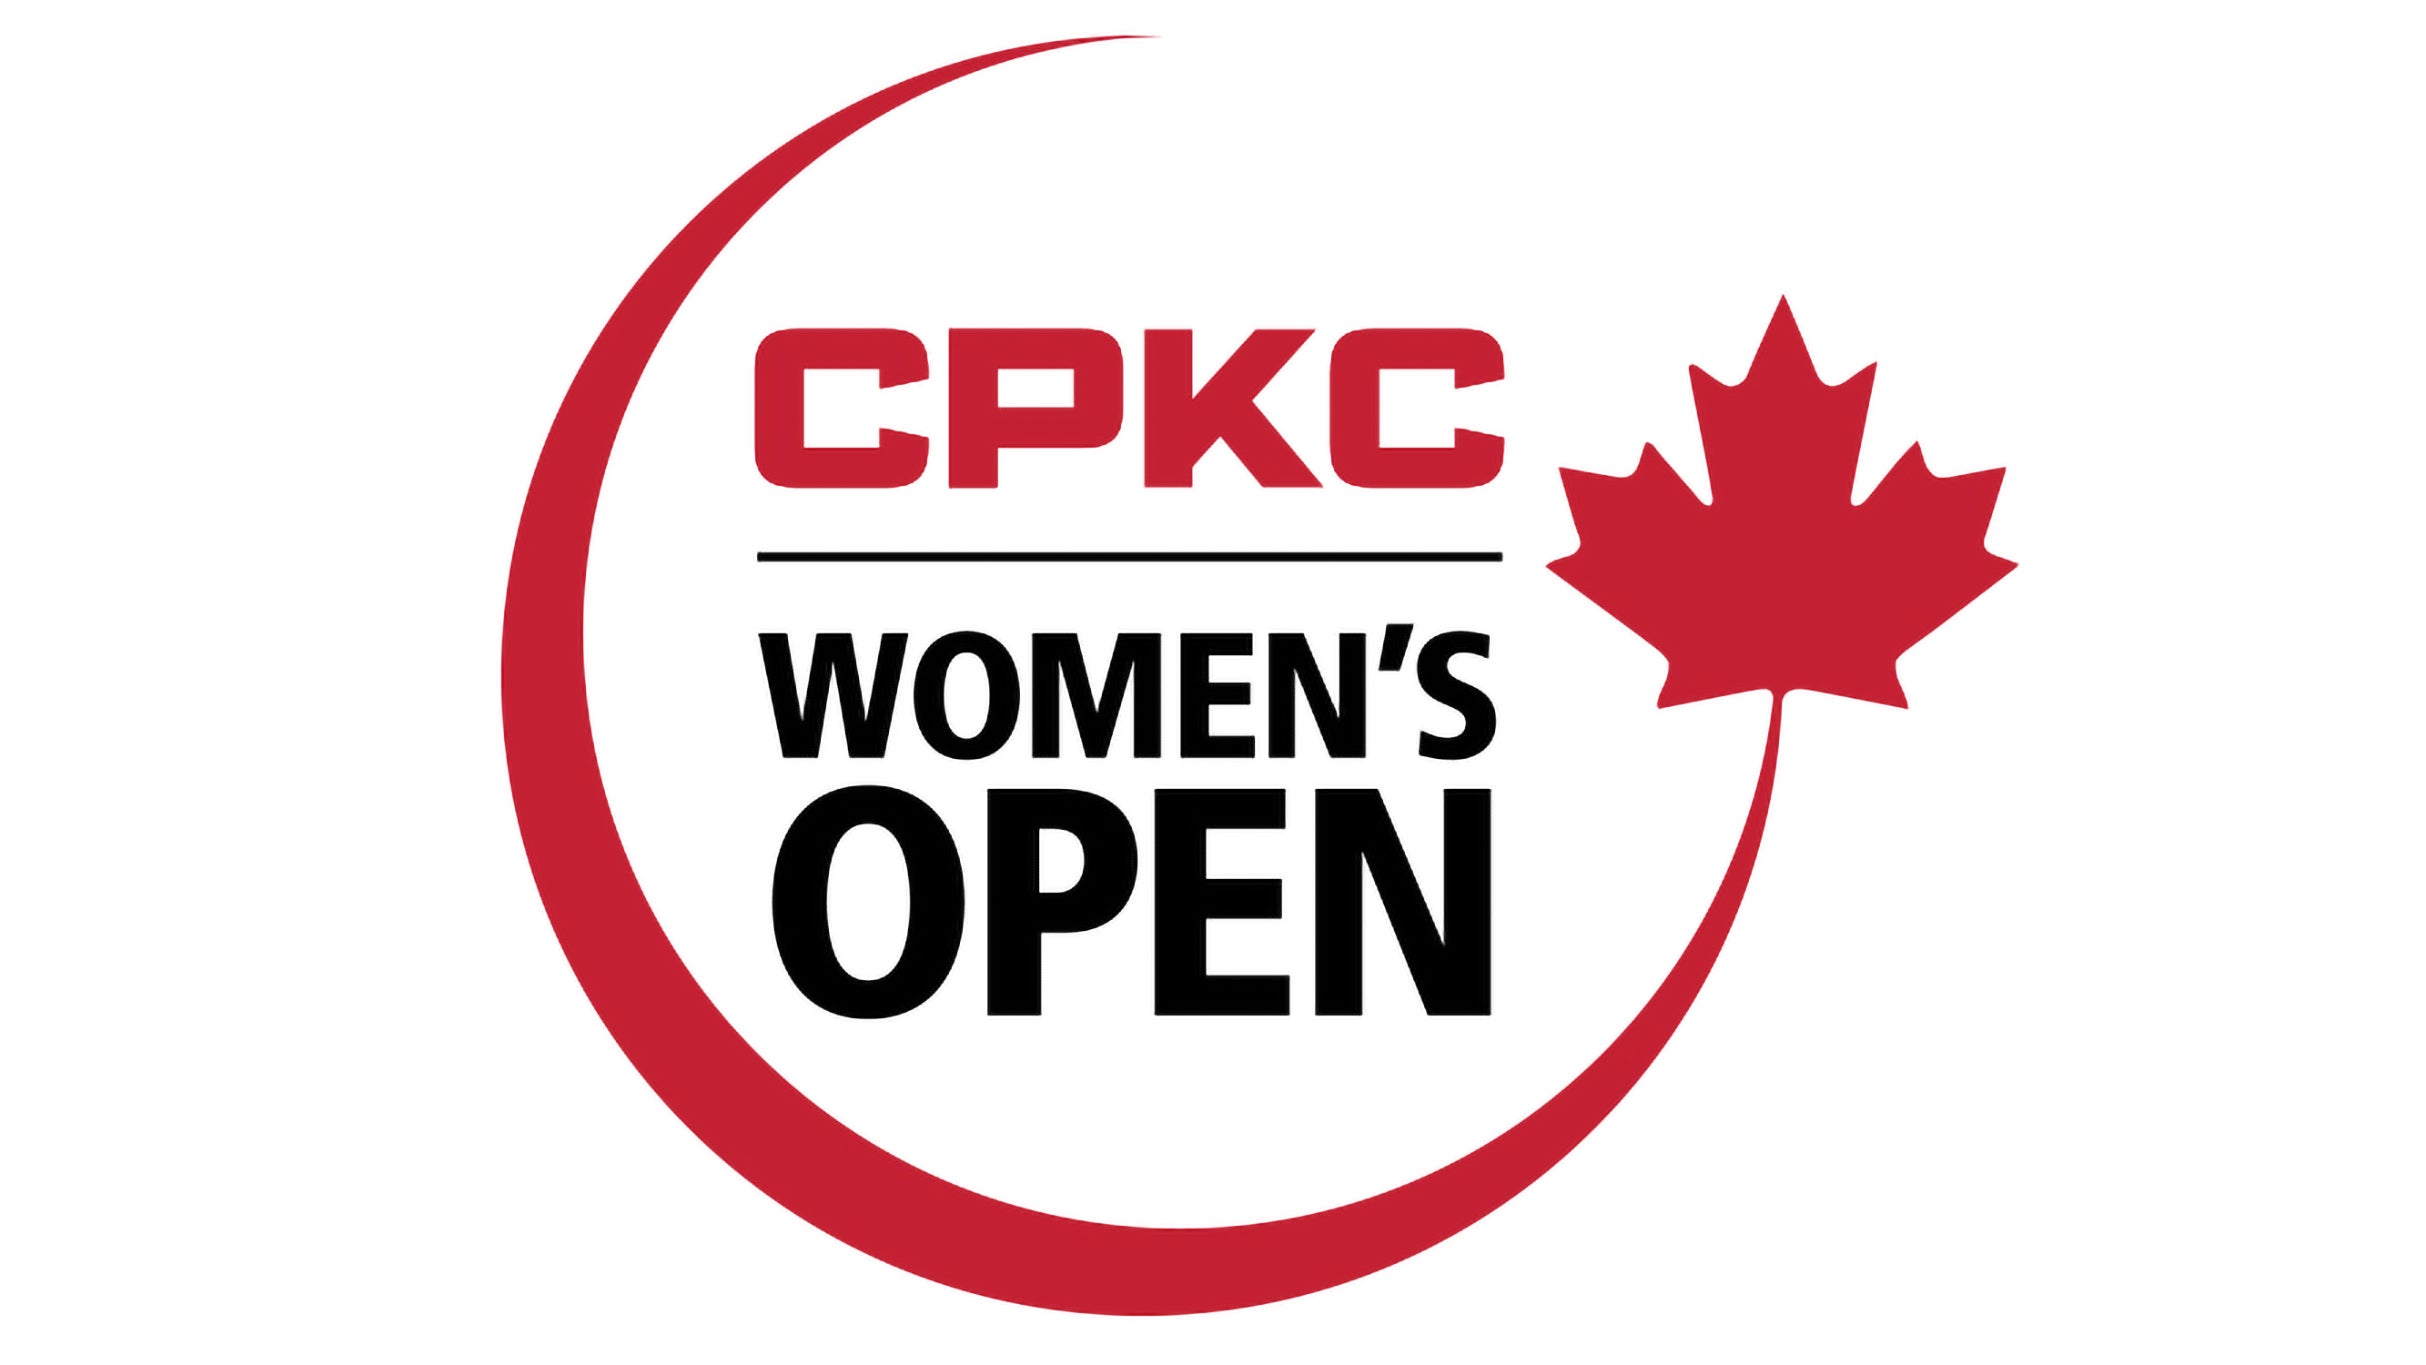 CPKC Women's Open - Saturday Tickets in Vancouver promo photo for Golf Canada Partner presale offer code